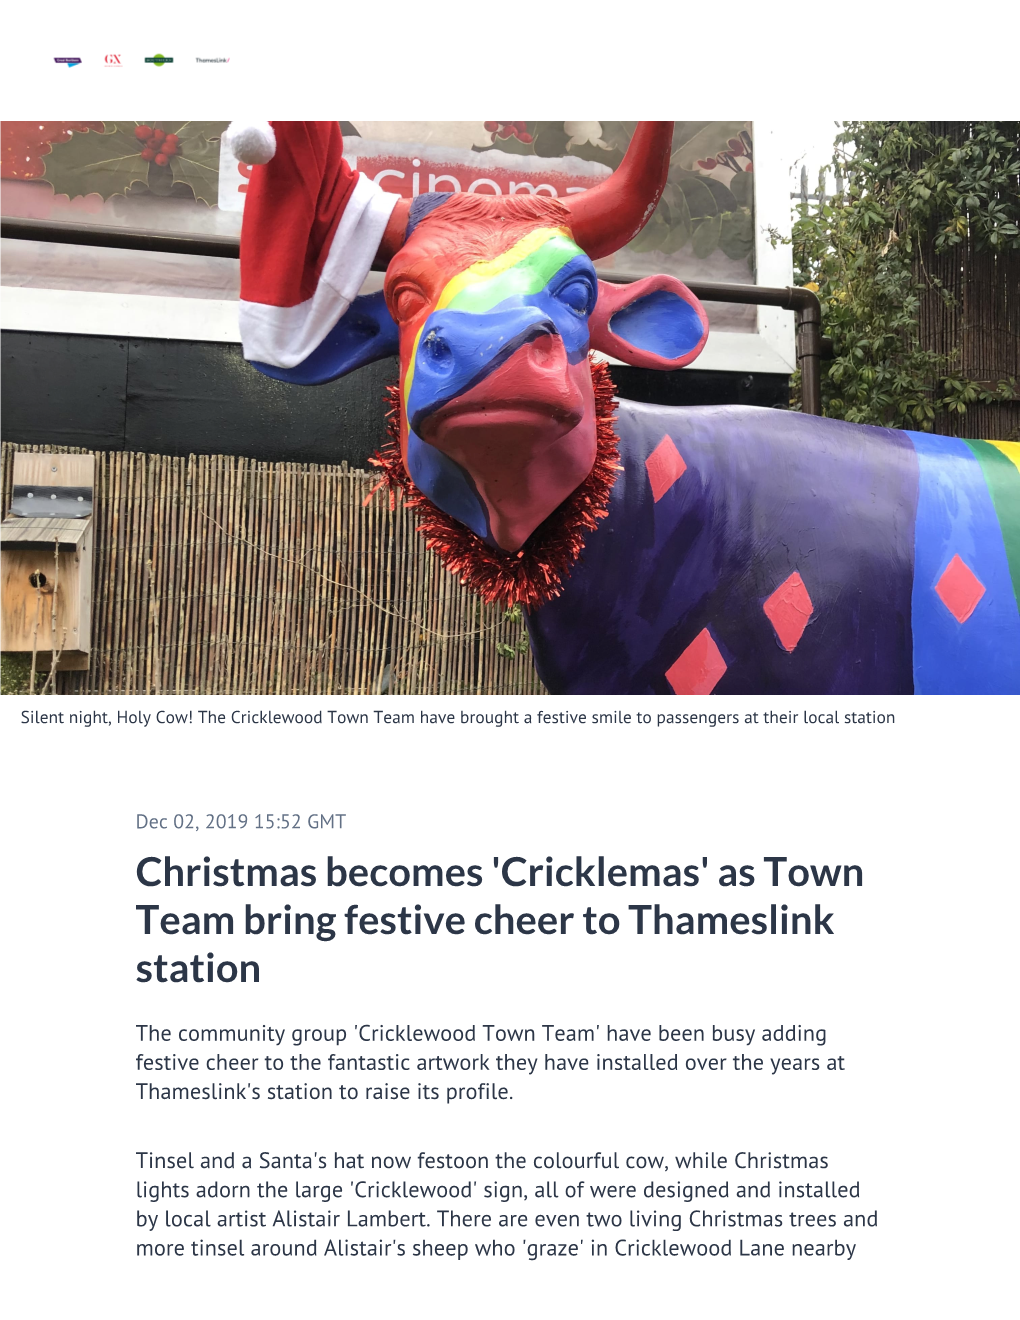 Christmas Becomes 'Cricklemas' As Town Team Bring Festive Cheer to Thameslink Station